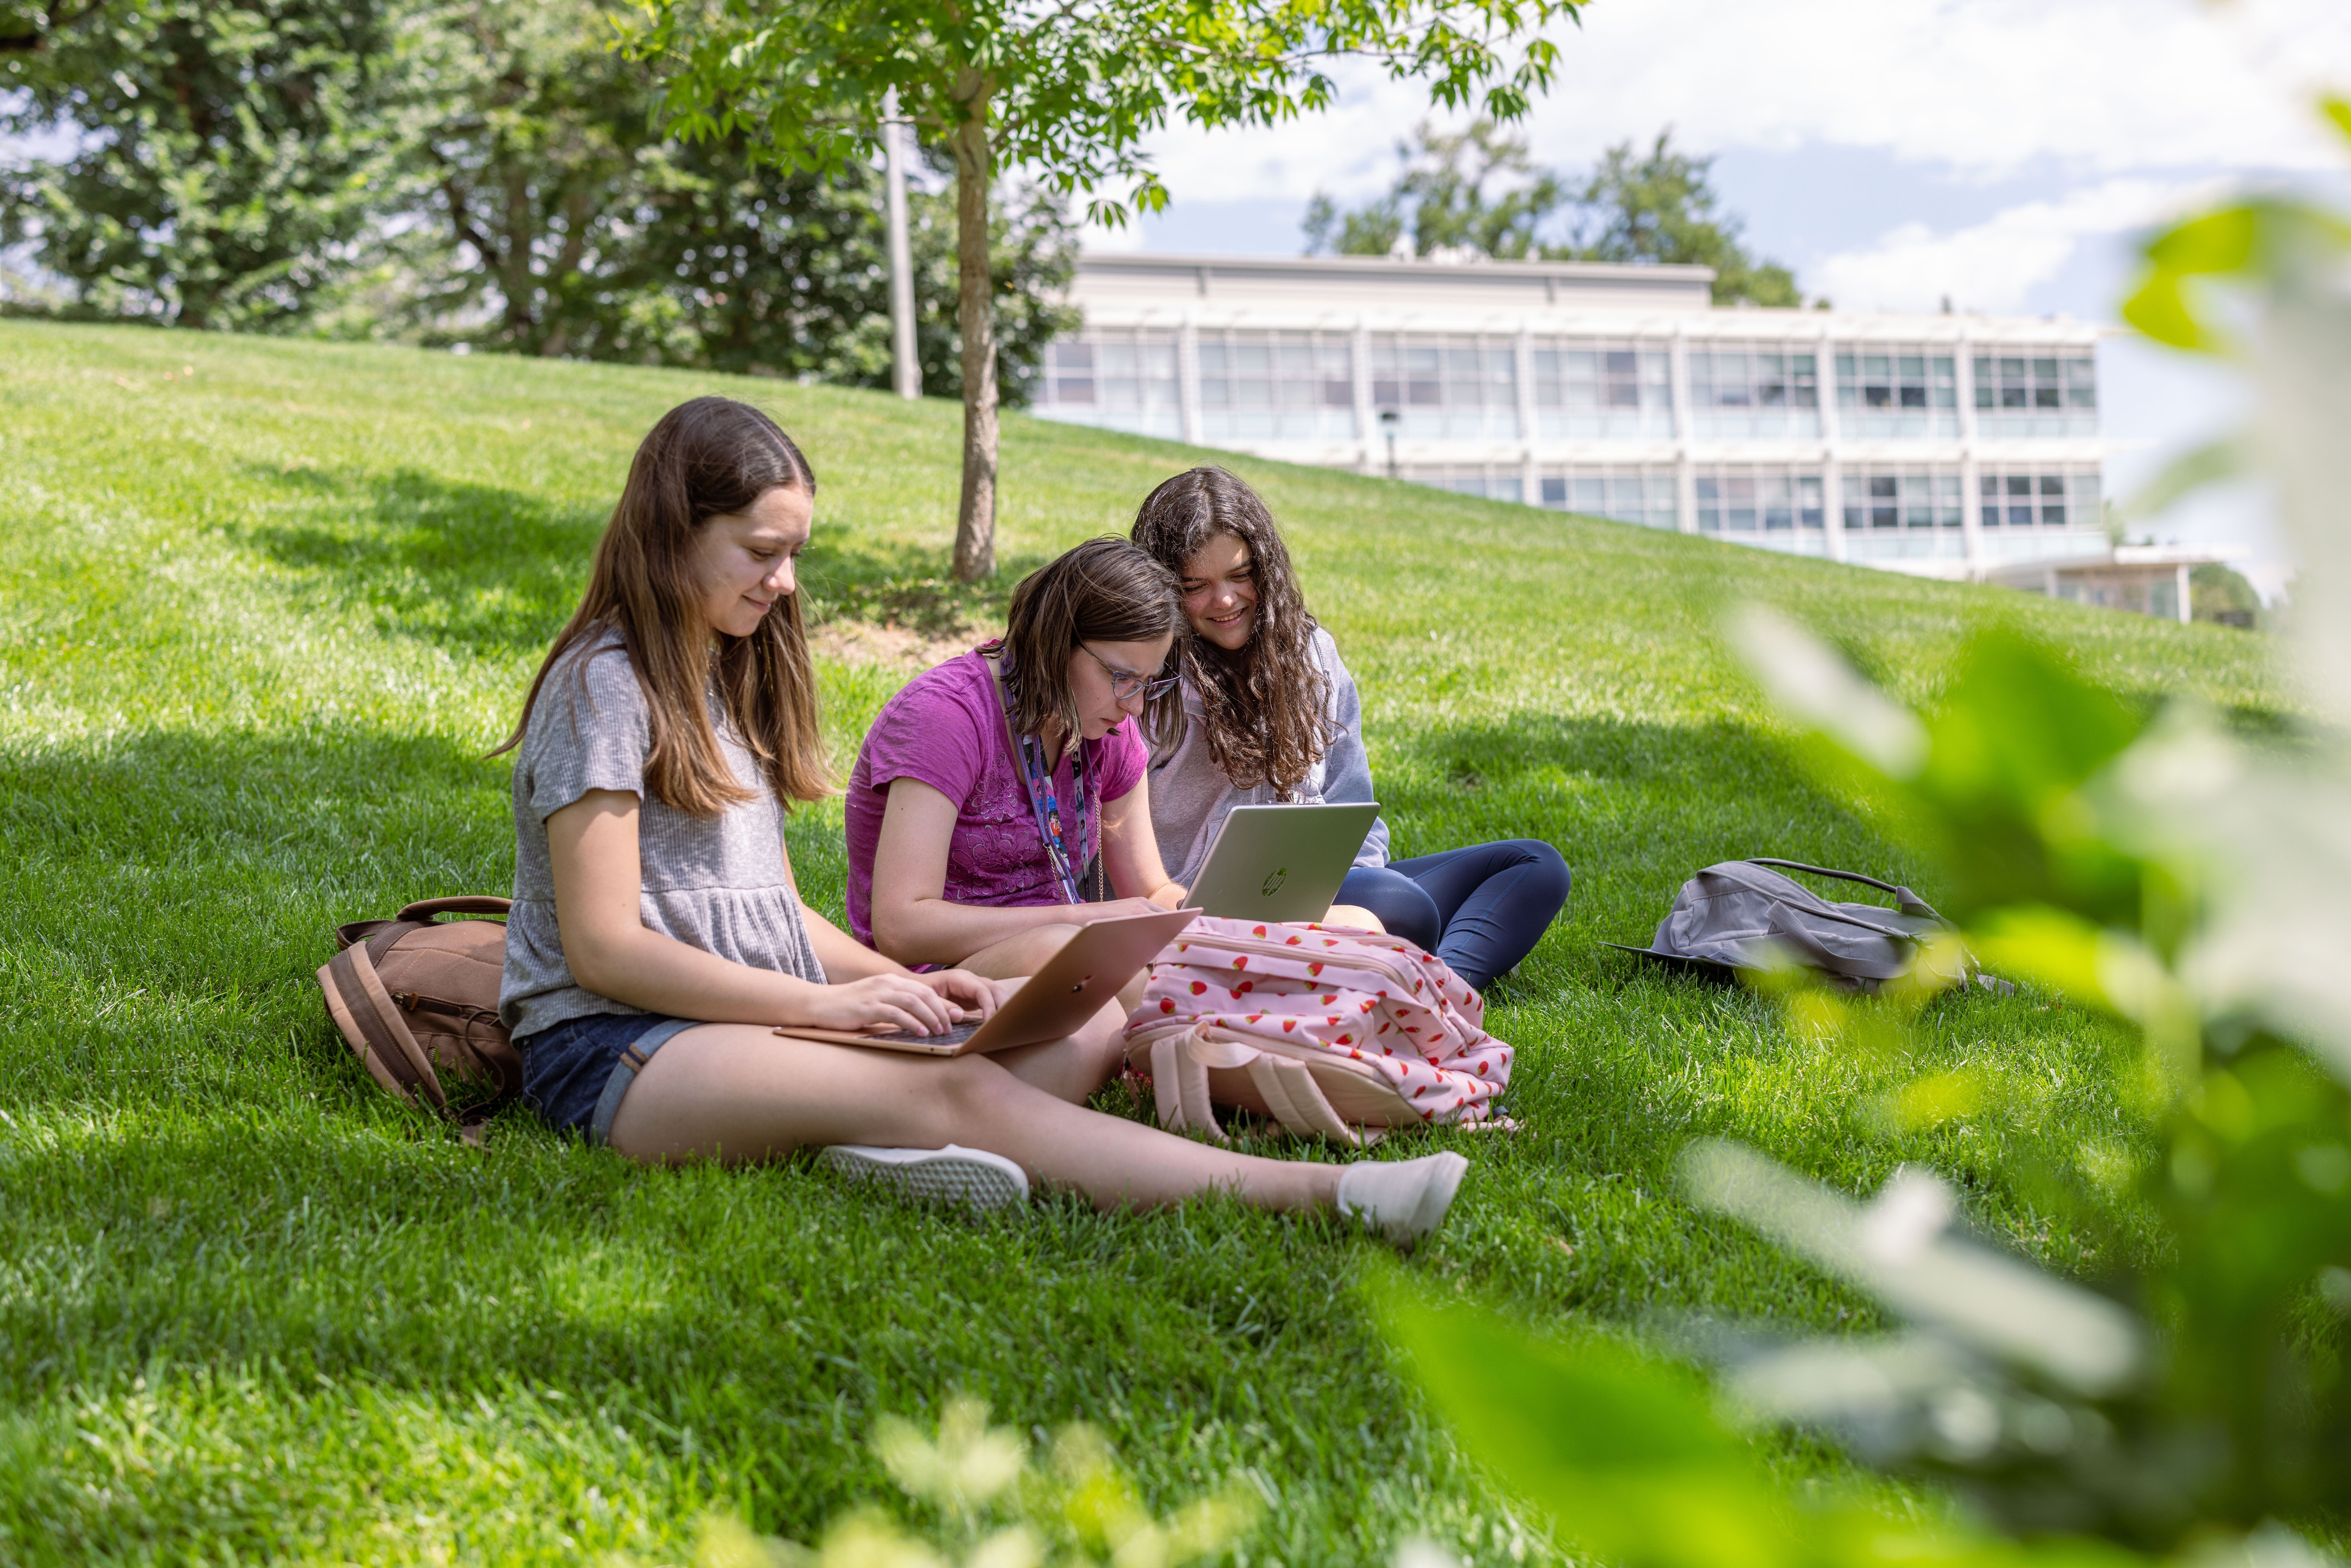 3 students sit on a grassy lawn and study.